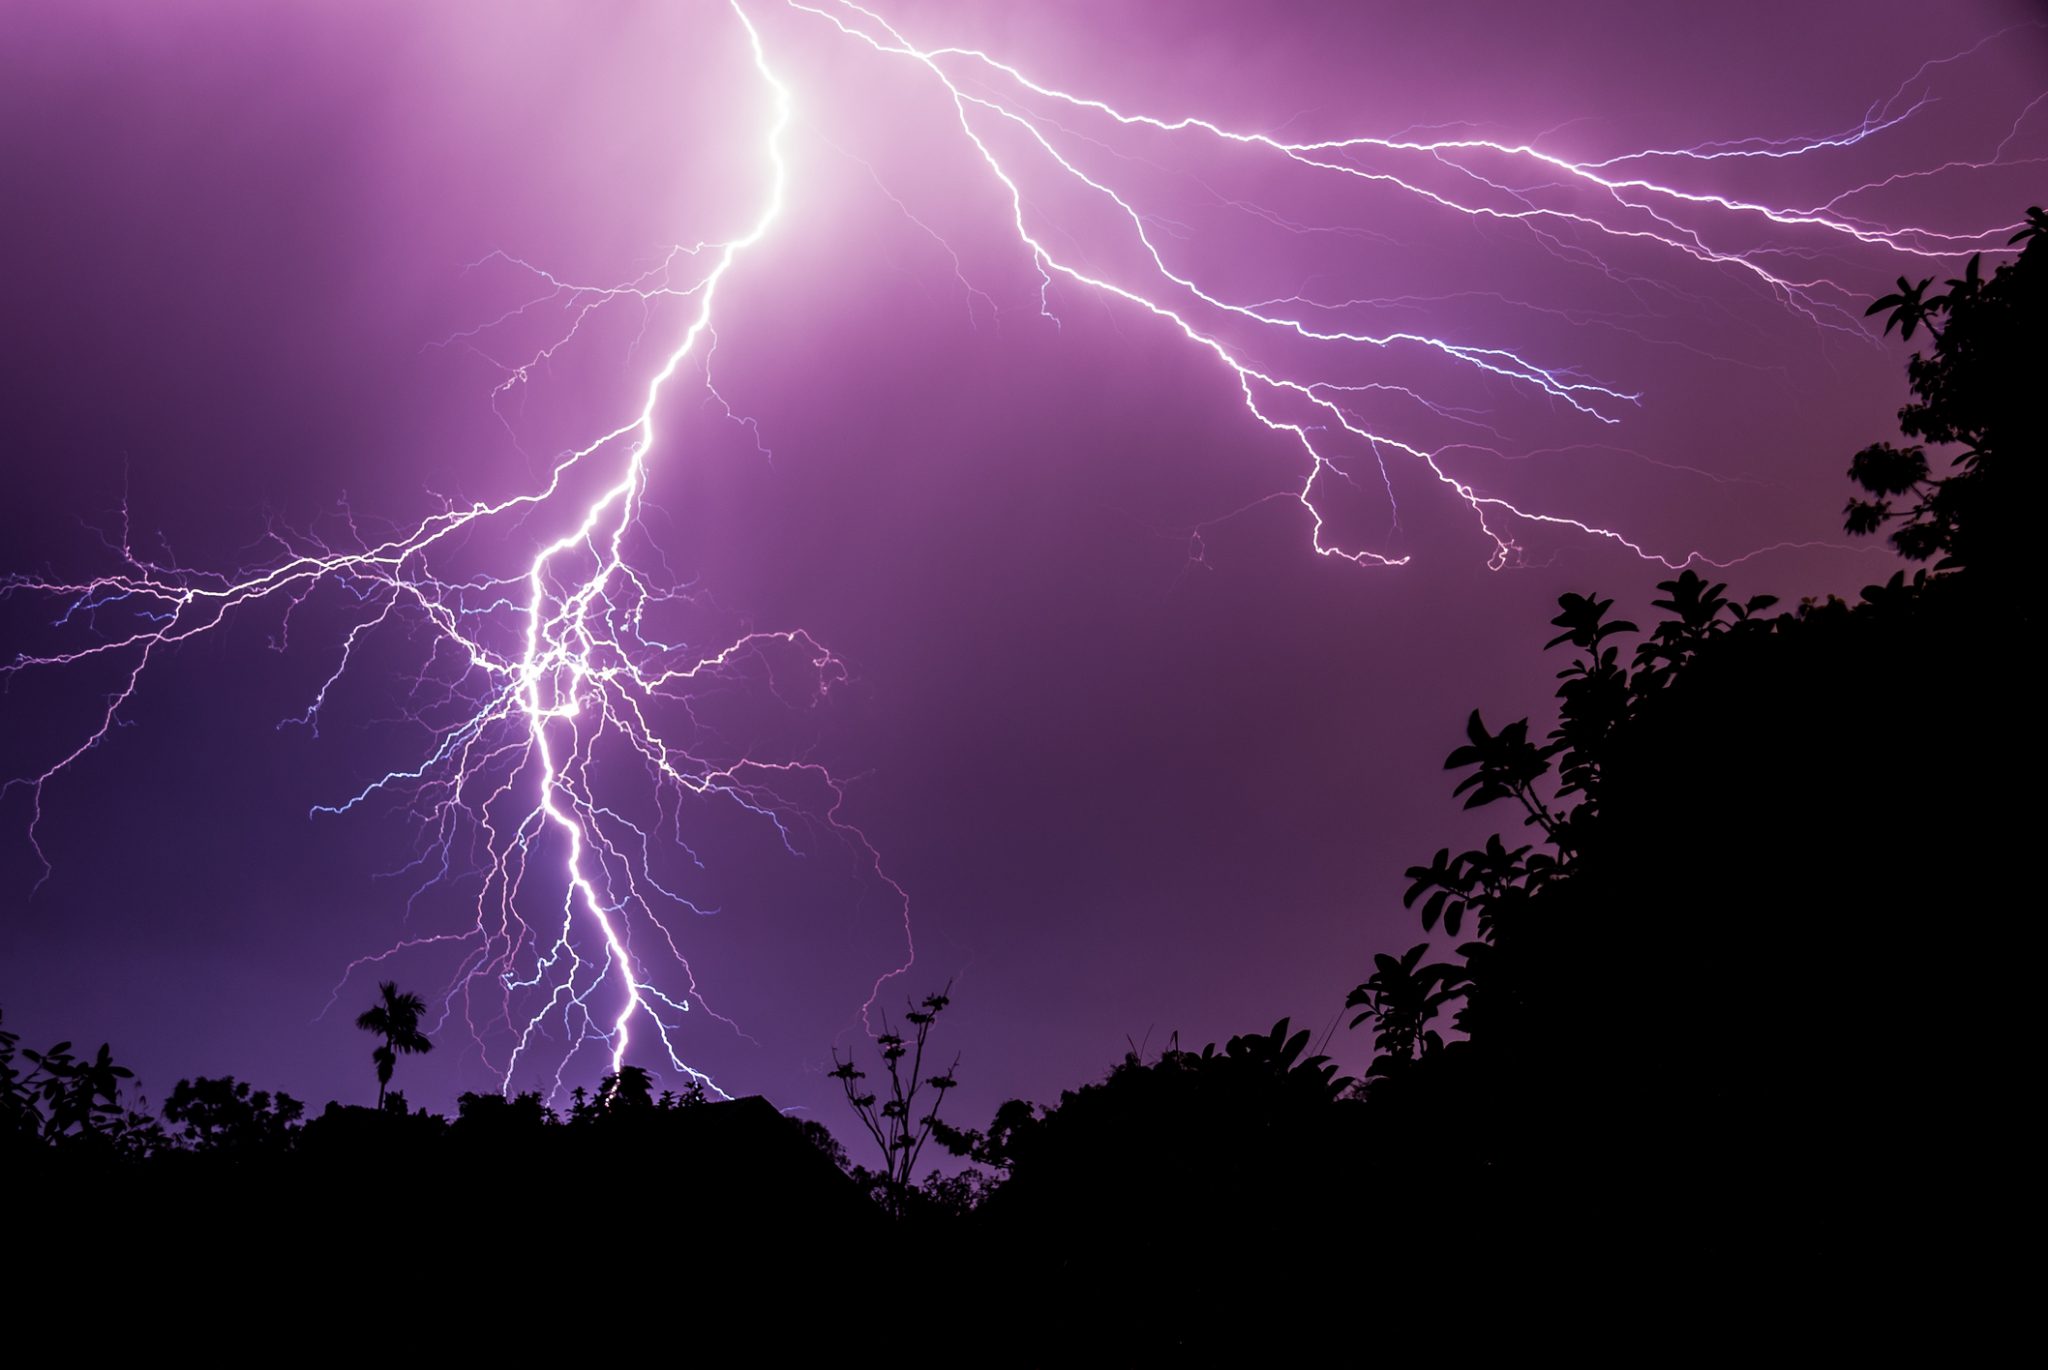 Dry lightning strikes increase with climate change